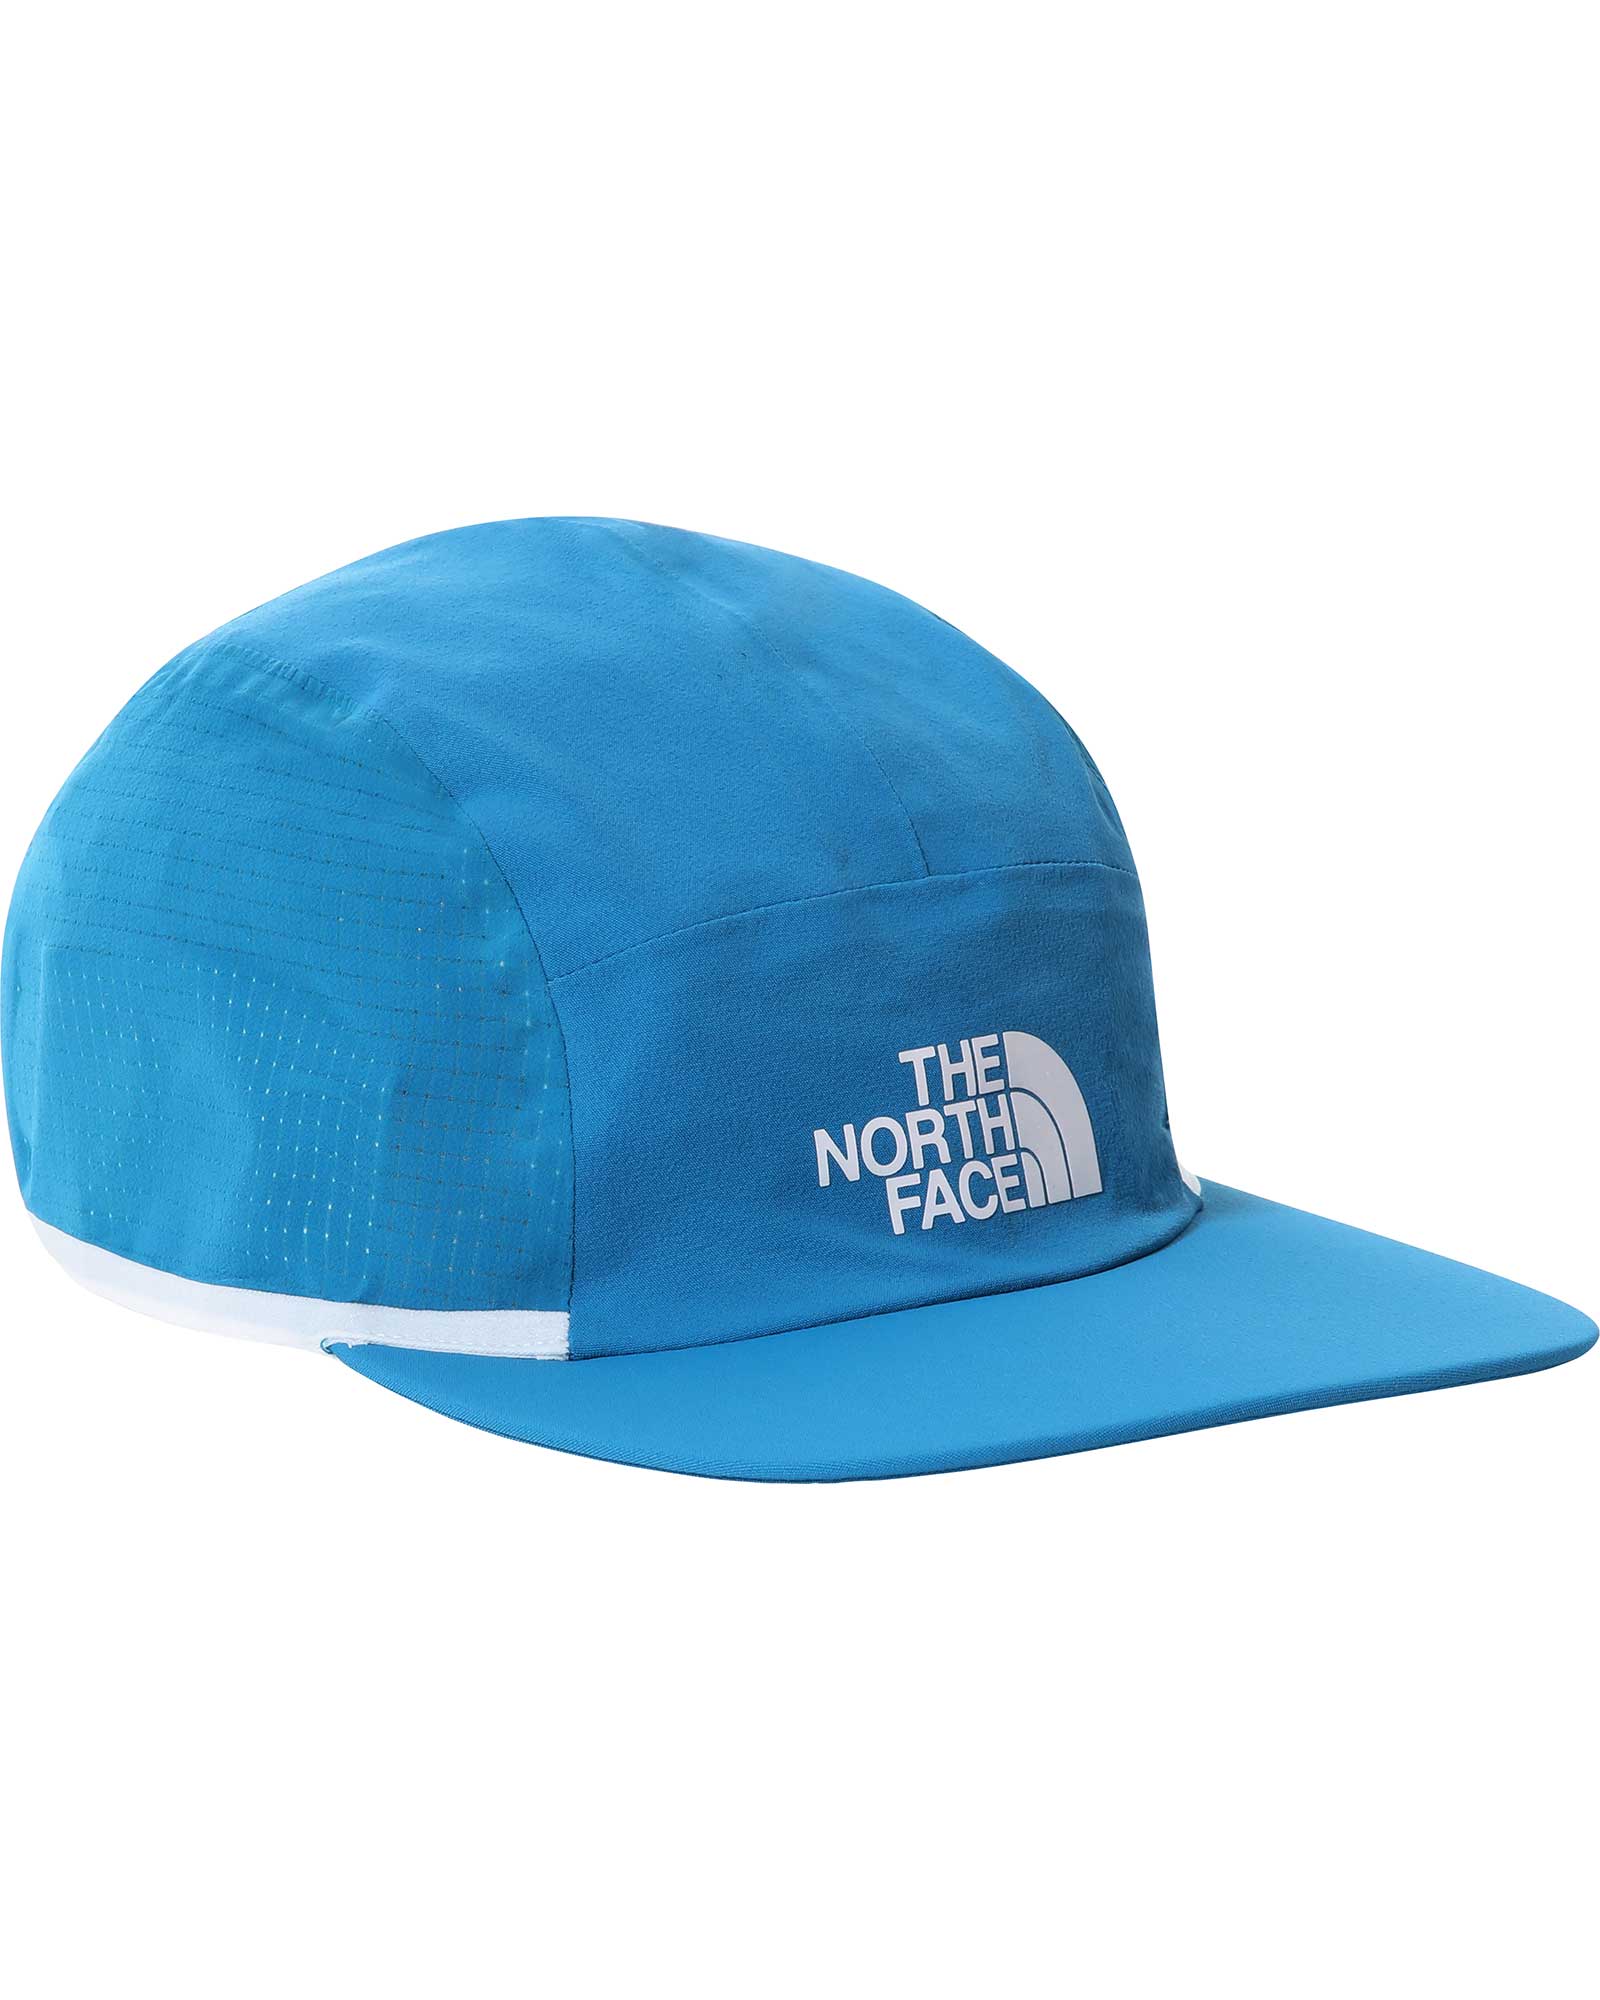 Product image of The North Face Flight Ball Cap